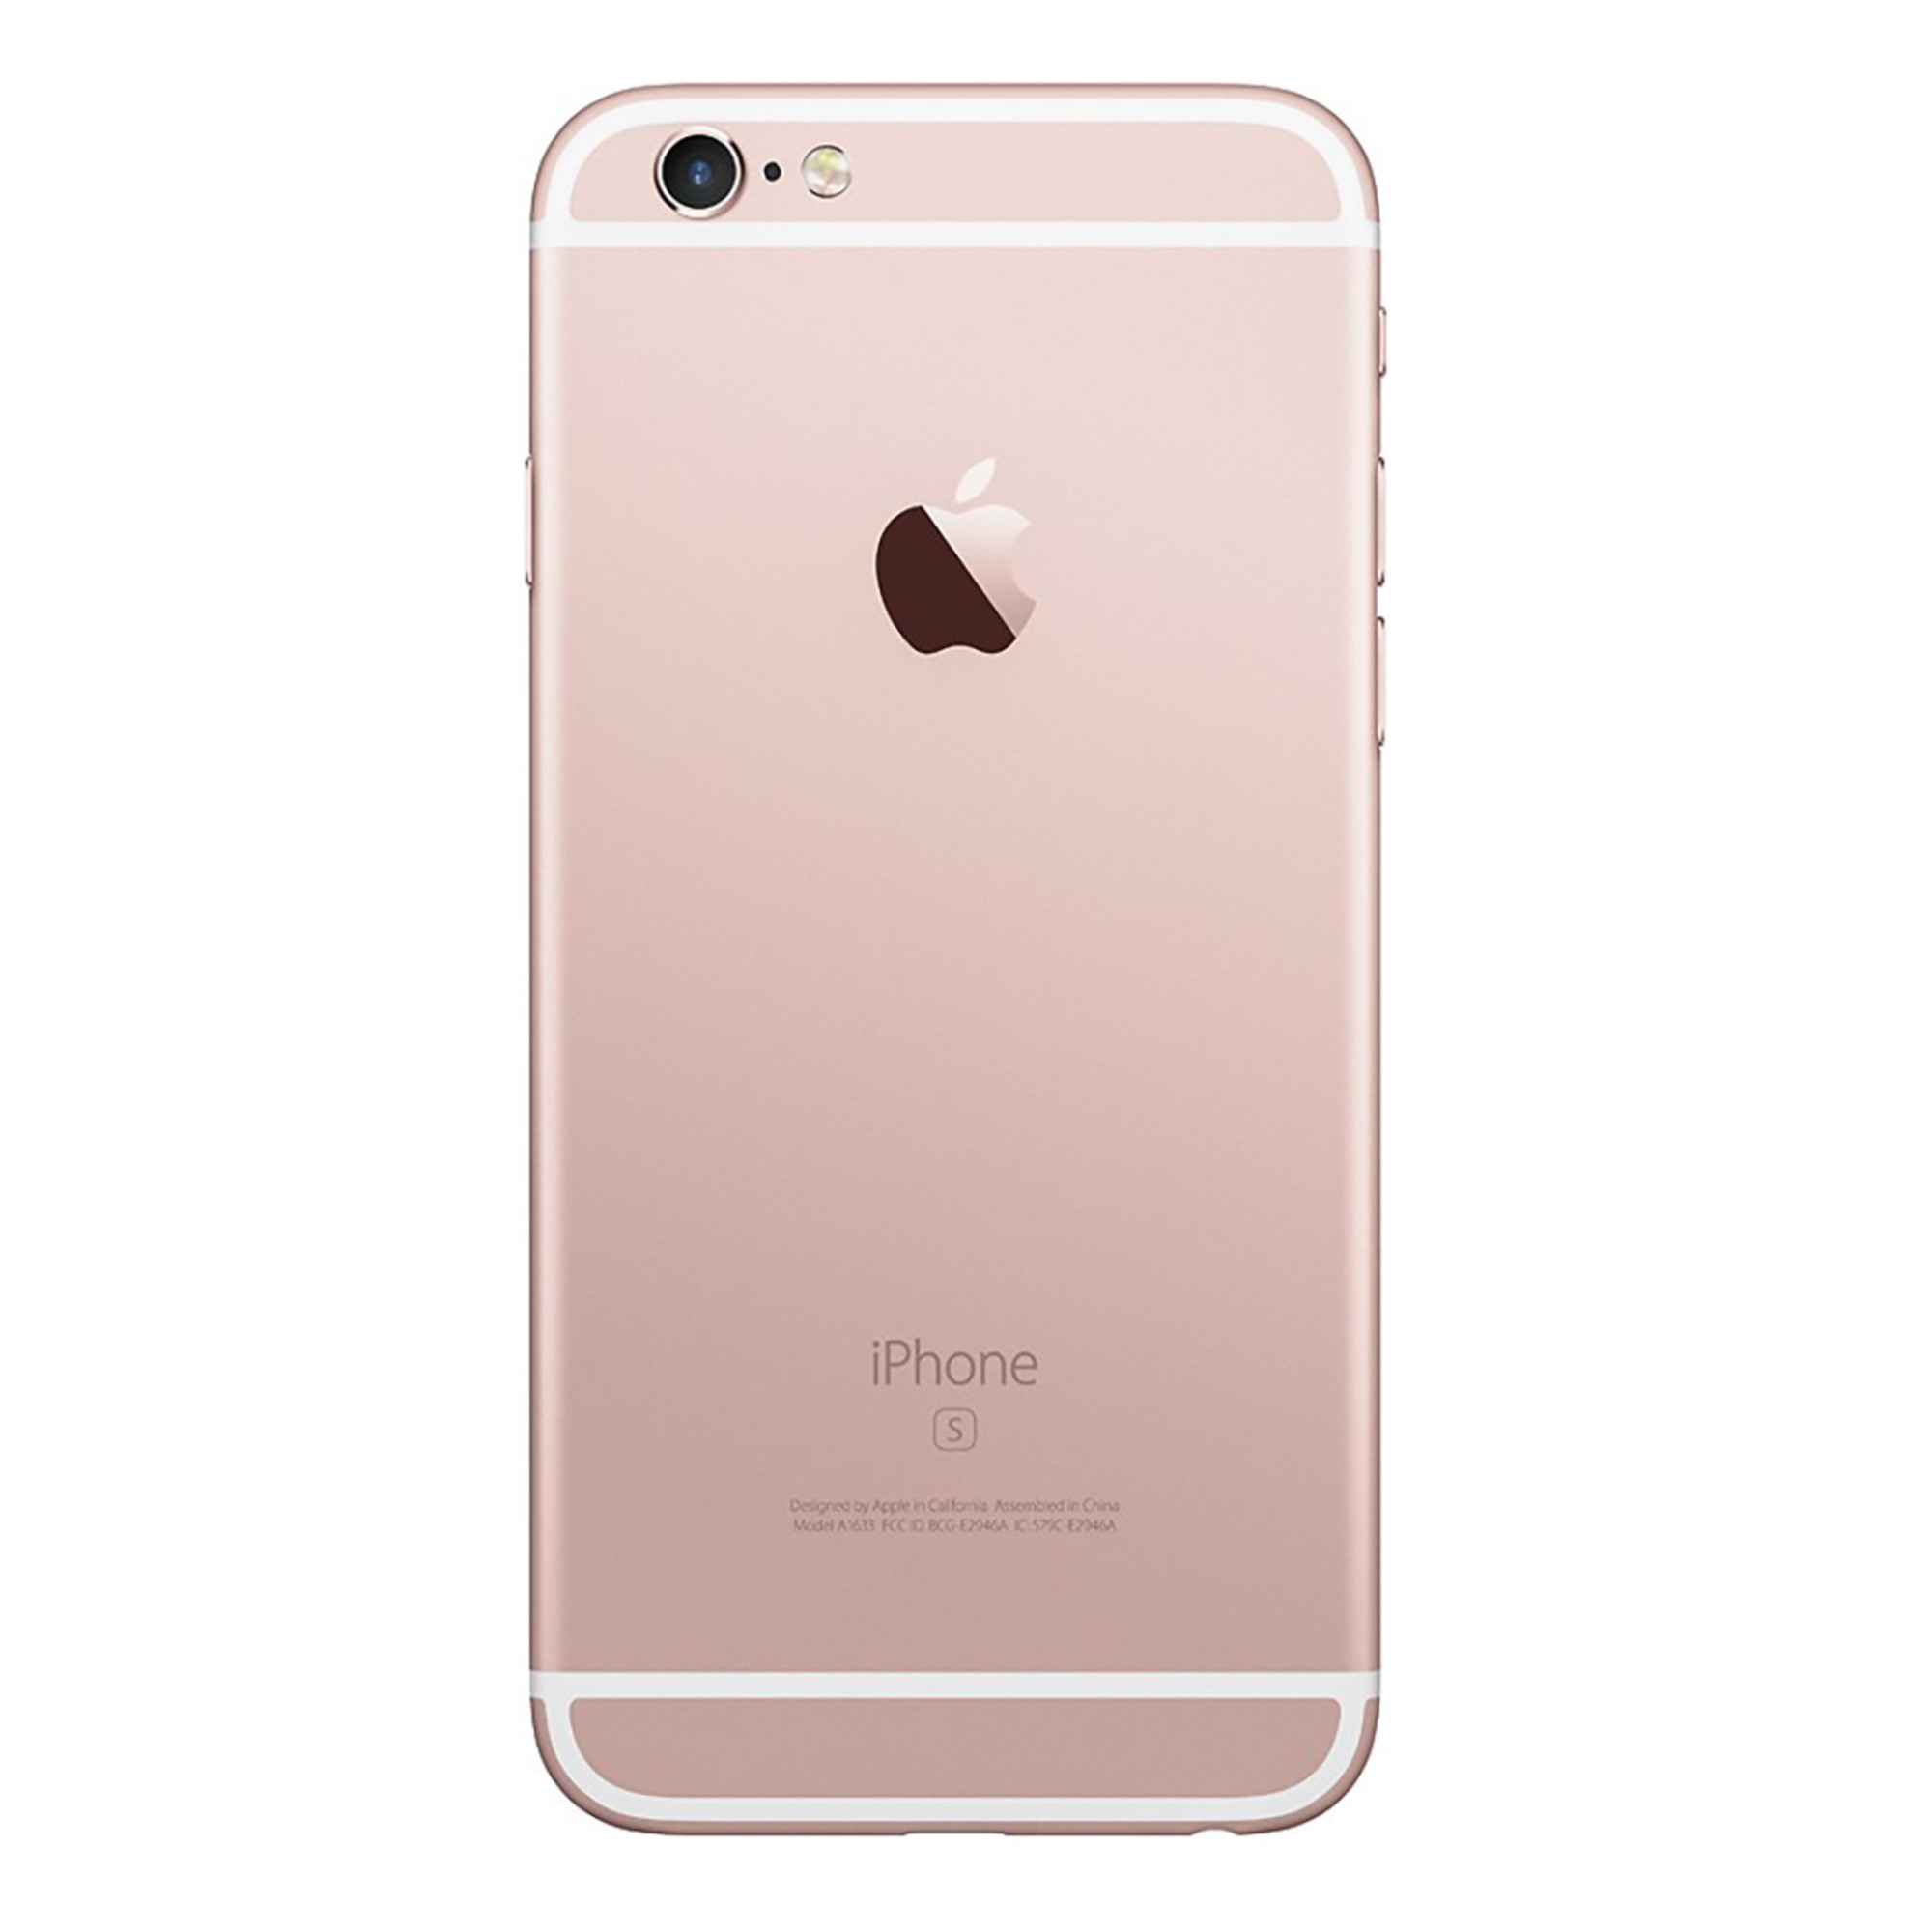 Apple iPhone 6s 16GB GSM Phone - Rose Gold (Used) + WeCare Alcohol Wipes Pack (50 Wipes) - image 2 of 6